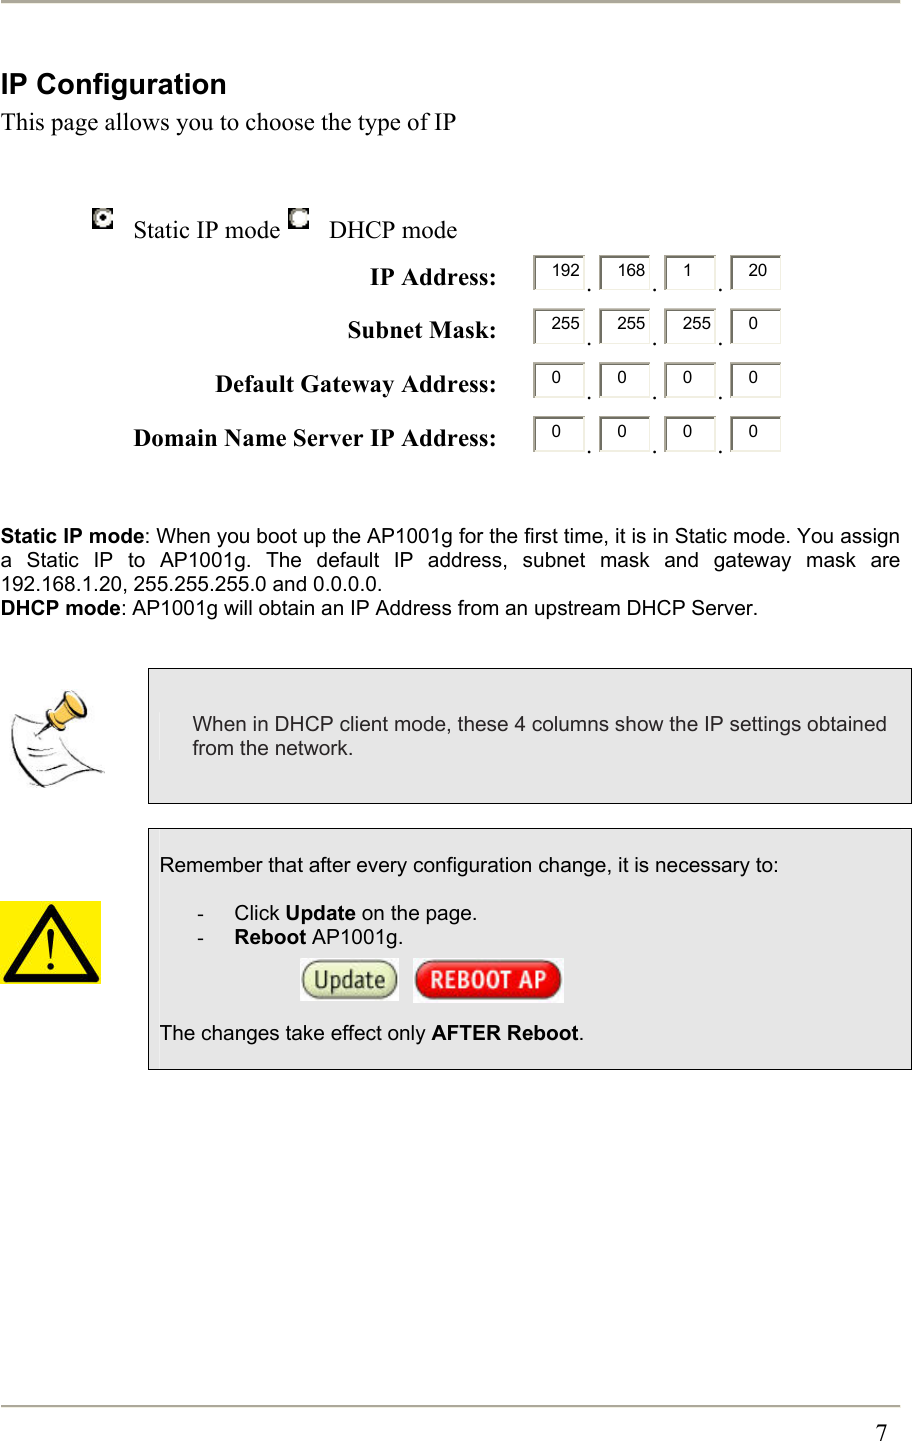                                                                                                                                                 7 IP Configuration This page allows you to choose the type of IP    Static IP mode  DHCP mode  IP Address:      192 .  168 .  1.  20  Subnet Mask:      255 .  255 .  255 .  0 Default Gateway Address:      0.  0.  0.  0 Domain Name Server IP Address:      0.  0.  0.  0   Static IP mode: When you boot up the AP1001g for the first time, it is in Static mode. You assign a Static IP to AP1001g. The default IP address, subnet mask and gateway mask are 192.168.1.20, 255.255.255.0 and 0.0.0.0. DHCP mode: AP1001g will obtain an IP Address from an upstream DHCP Server.    When in DHCP client mode, these 4 columns show the IP settings obtained from the network.       Remember that after every configuration change, it is necessary to:  -  Click Update on the page. -  Reboot AP1001g.        The changes take effect only AFTER Reboot.  